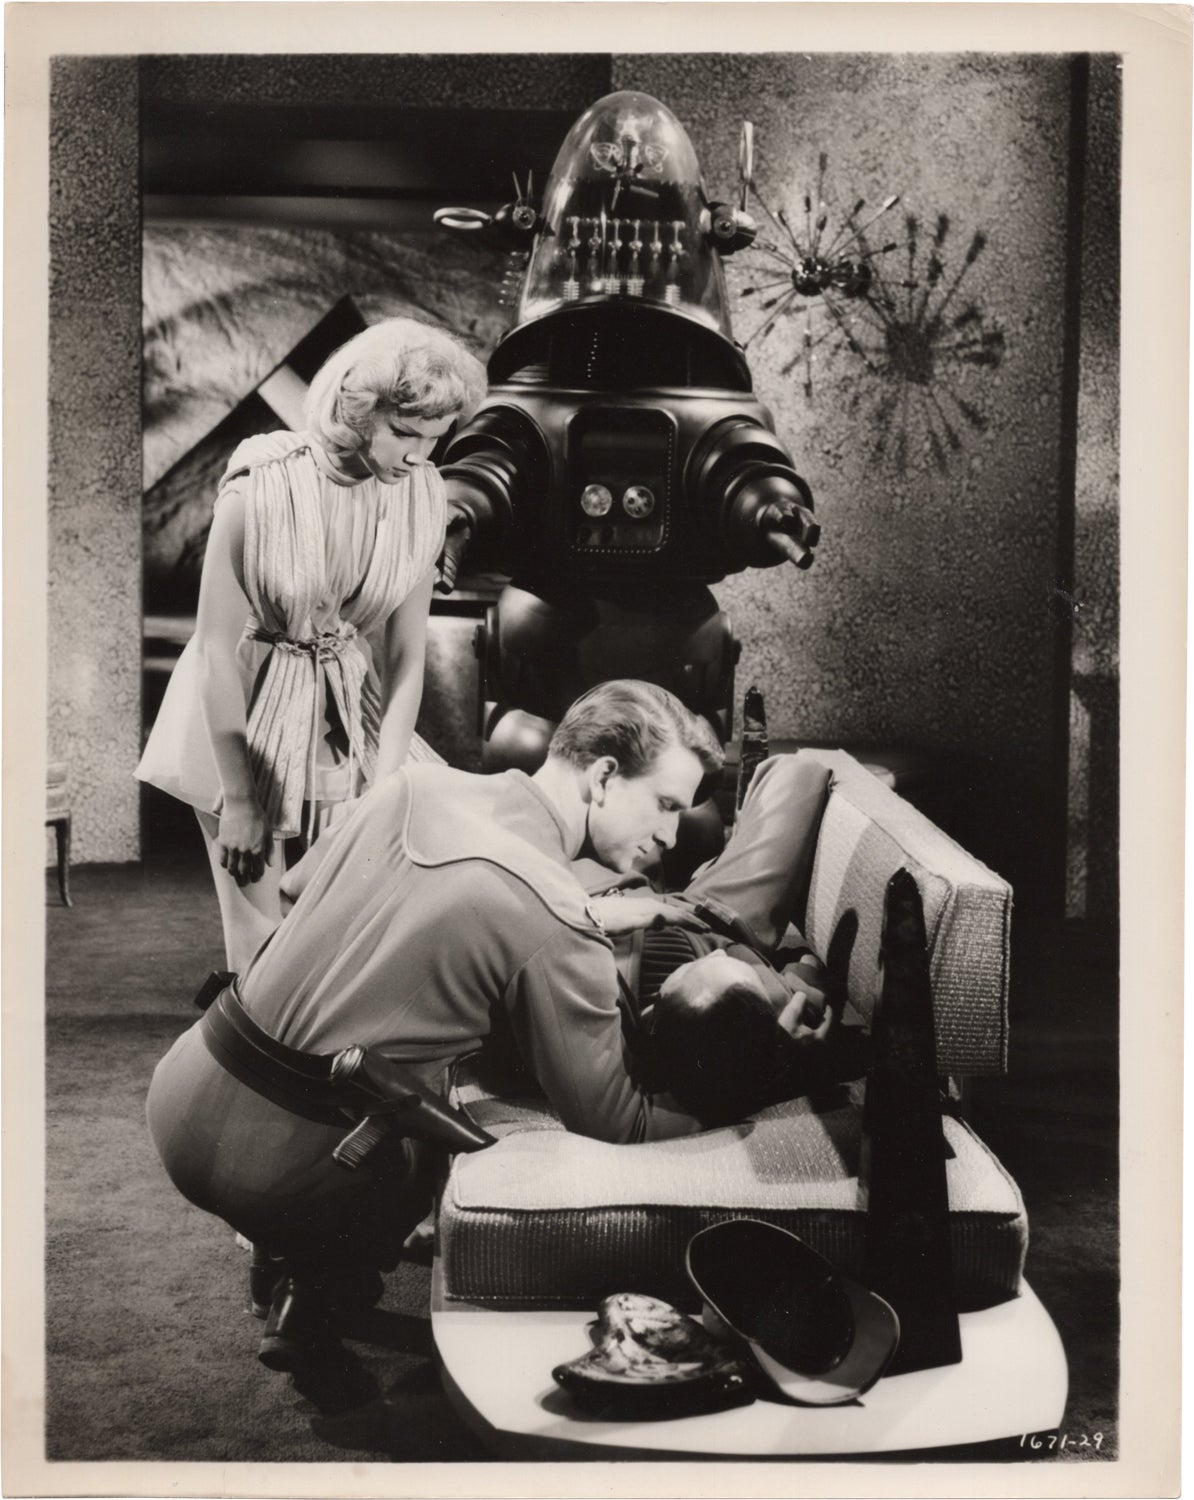 My thoughts on: Forbidden Planet (1956)